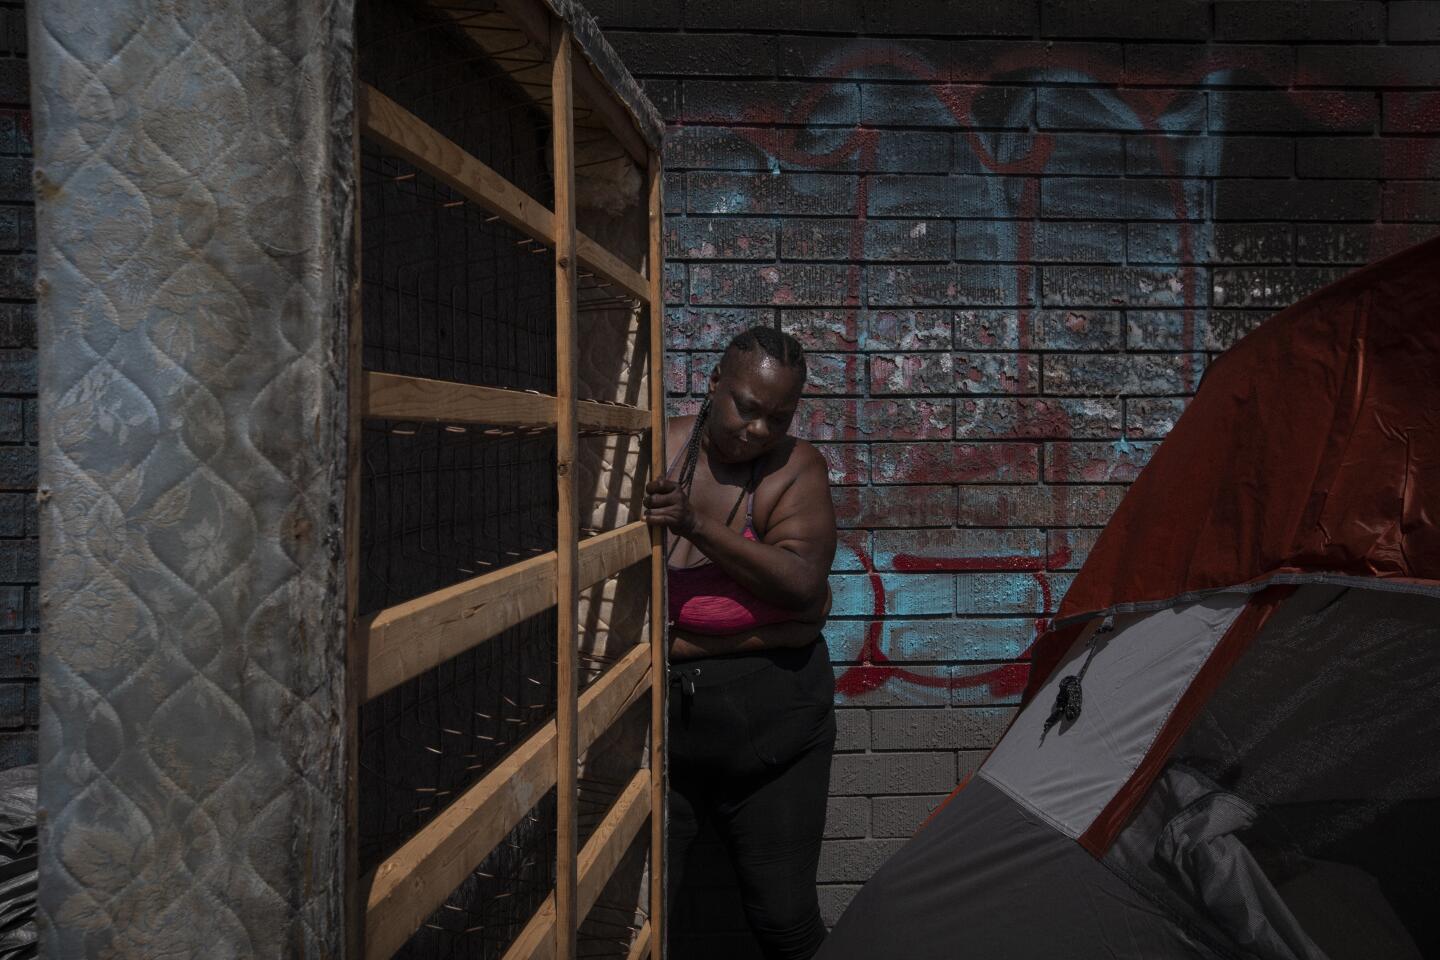 LOS ANGELES, CA JUNE 26, 2018: Leneace Pope, known as ÒNiecyÓ for short moves her mattress into her tent near West 39th Street and South Broadway in Los Angeles, CA June 26, 2018. (*Editors Note: Contact photo editor Mary Cooney should you have any questions. Please do not use this image for other stories. This image is for a future project by writer Tom Curwen.) (Francine Orr/ Los Angeles Times)